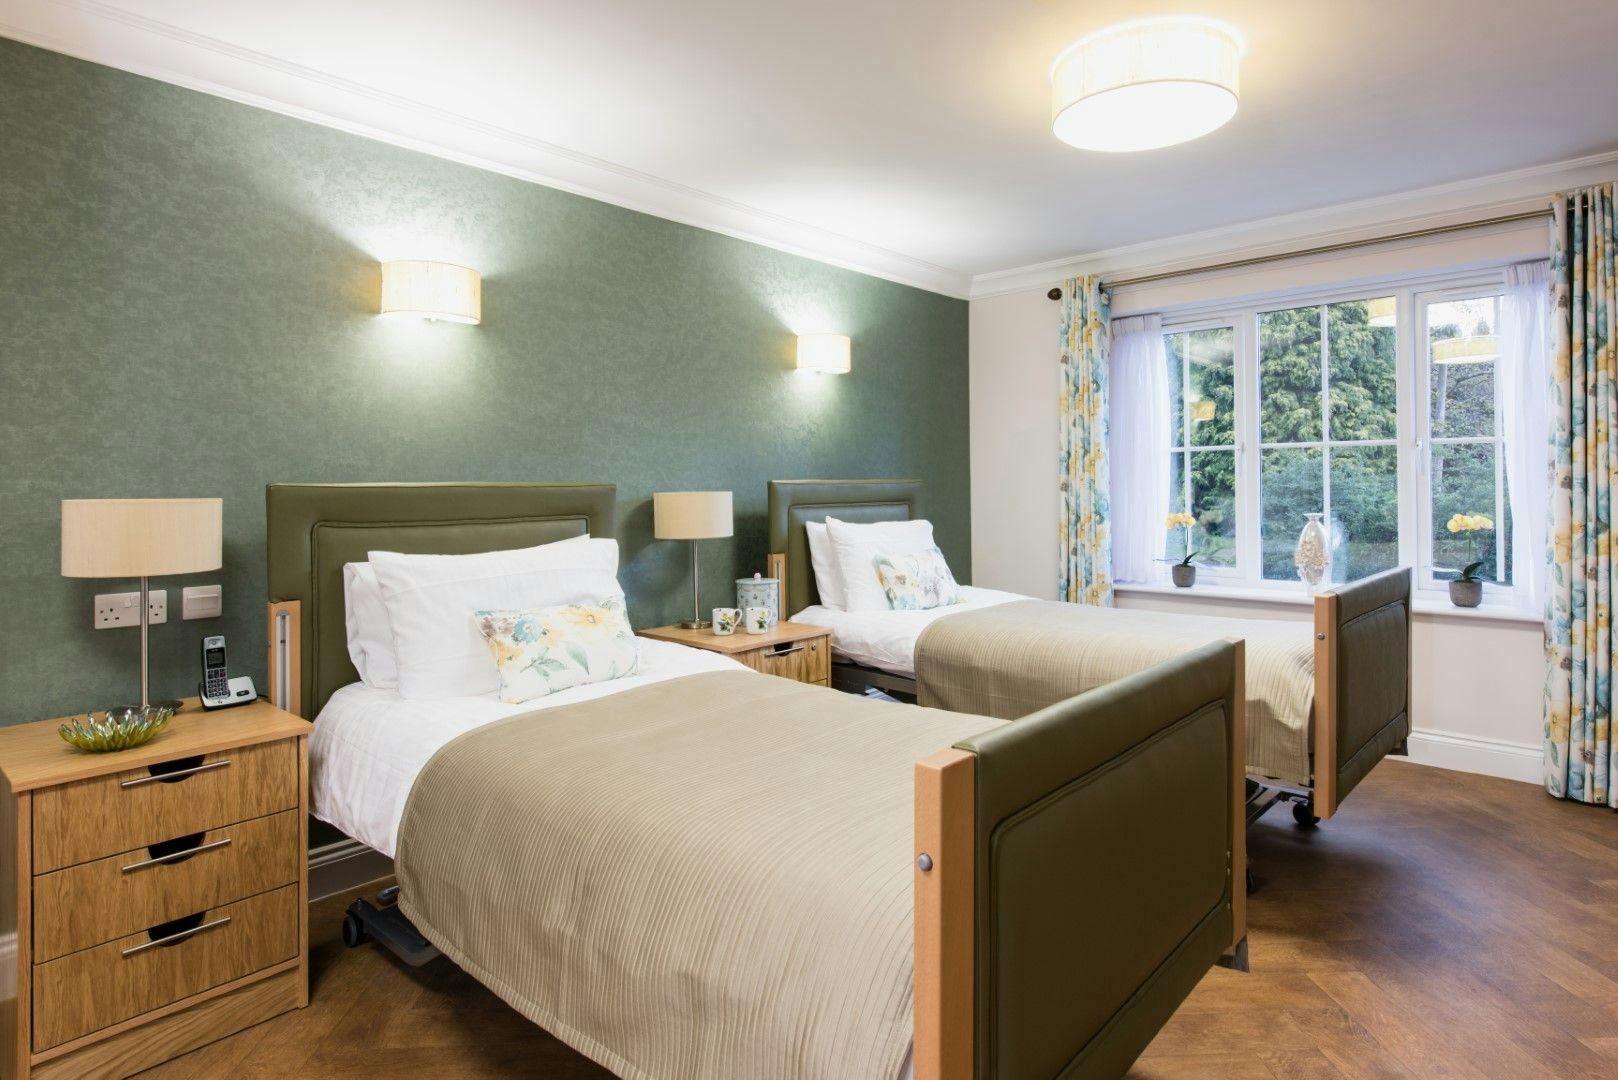 Bedroom at Lakeview Care Home in Surrey, South East England